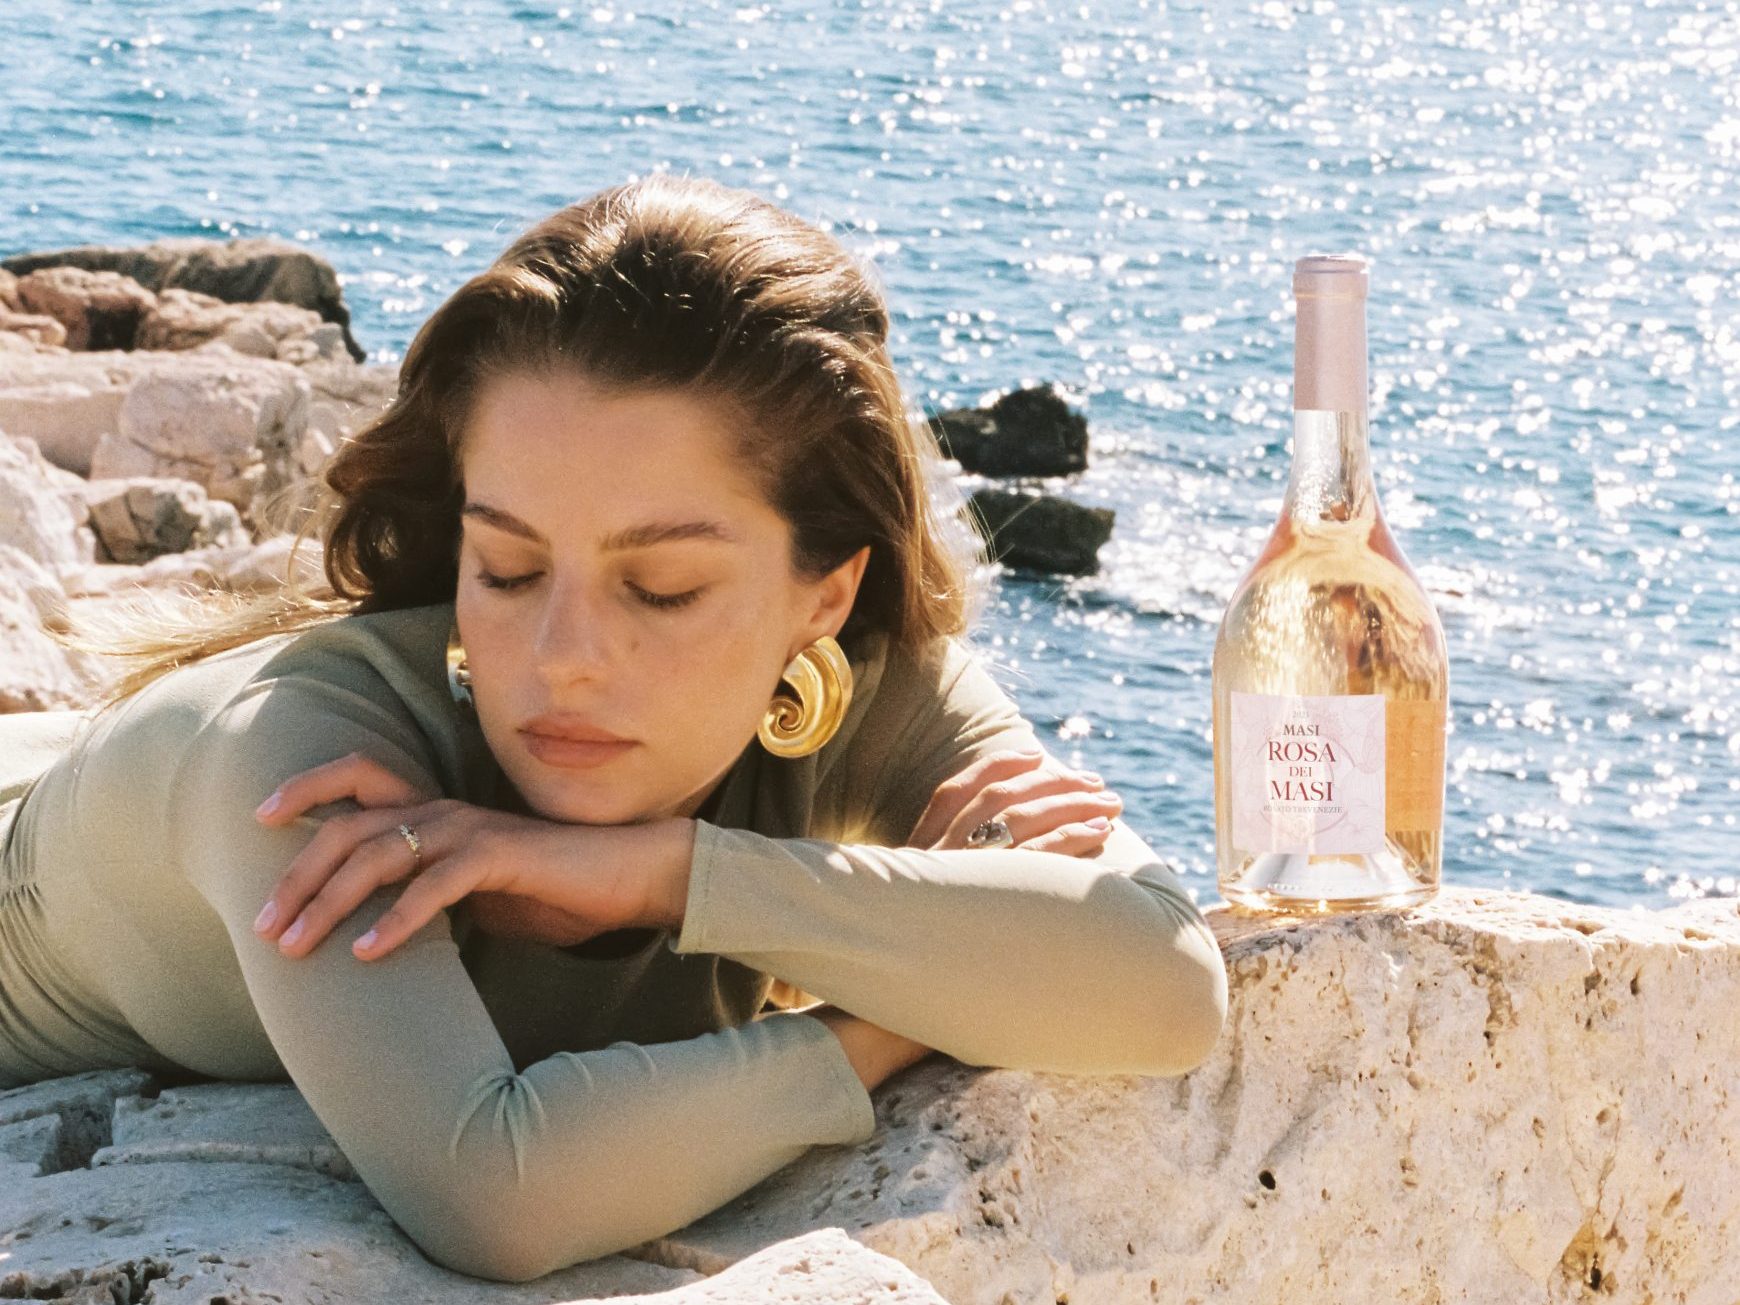 A woman wearing a green top rests on white rocks next to the sea. A bottle of Rosa dei Masi is placed on the rocks next to her.